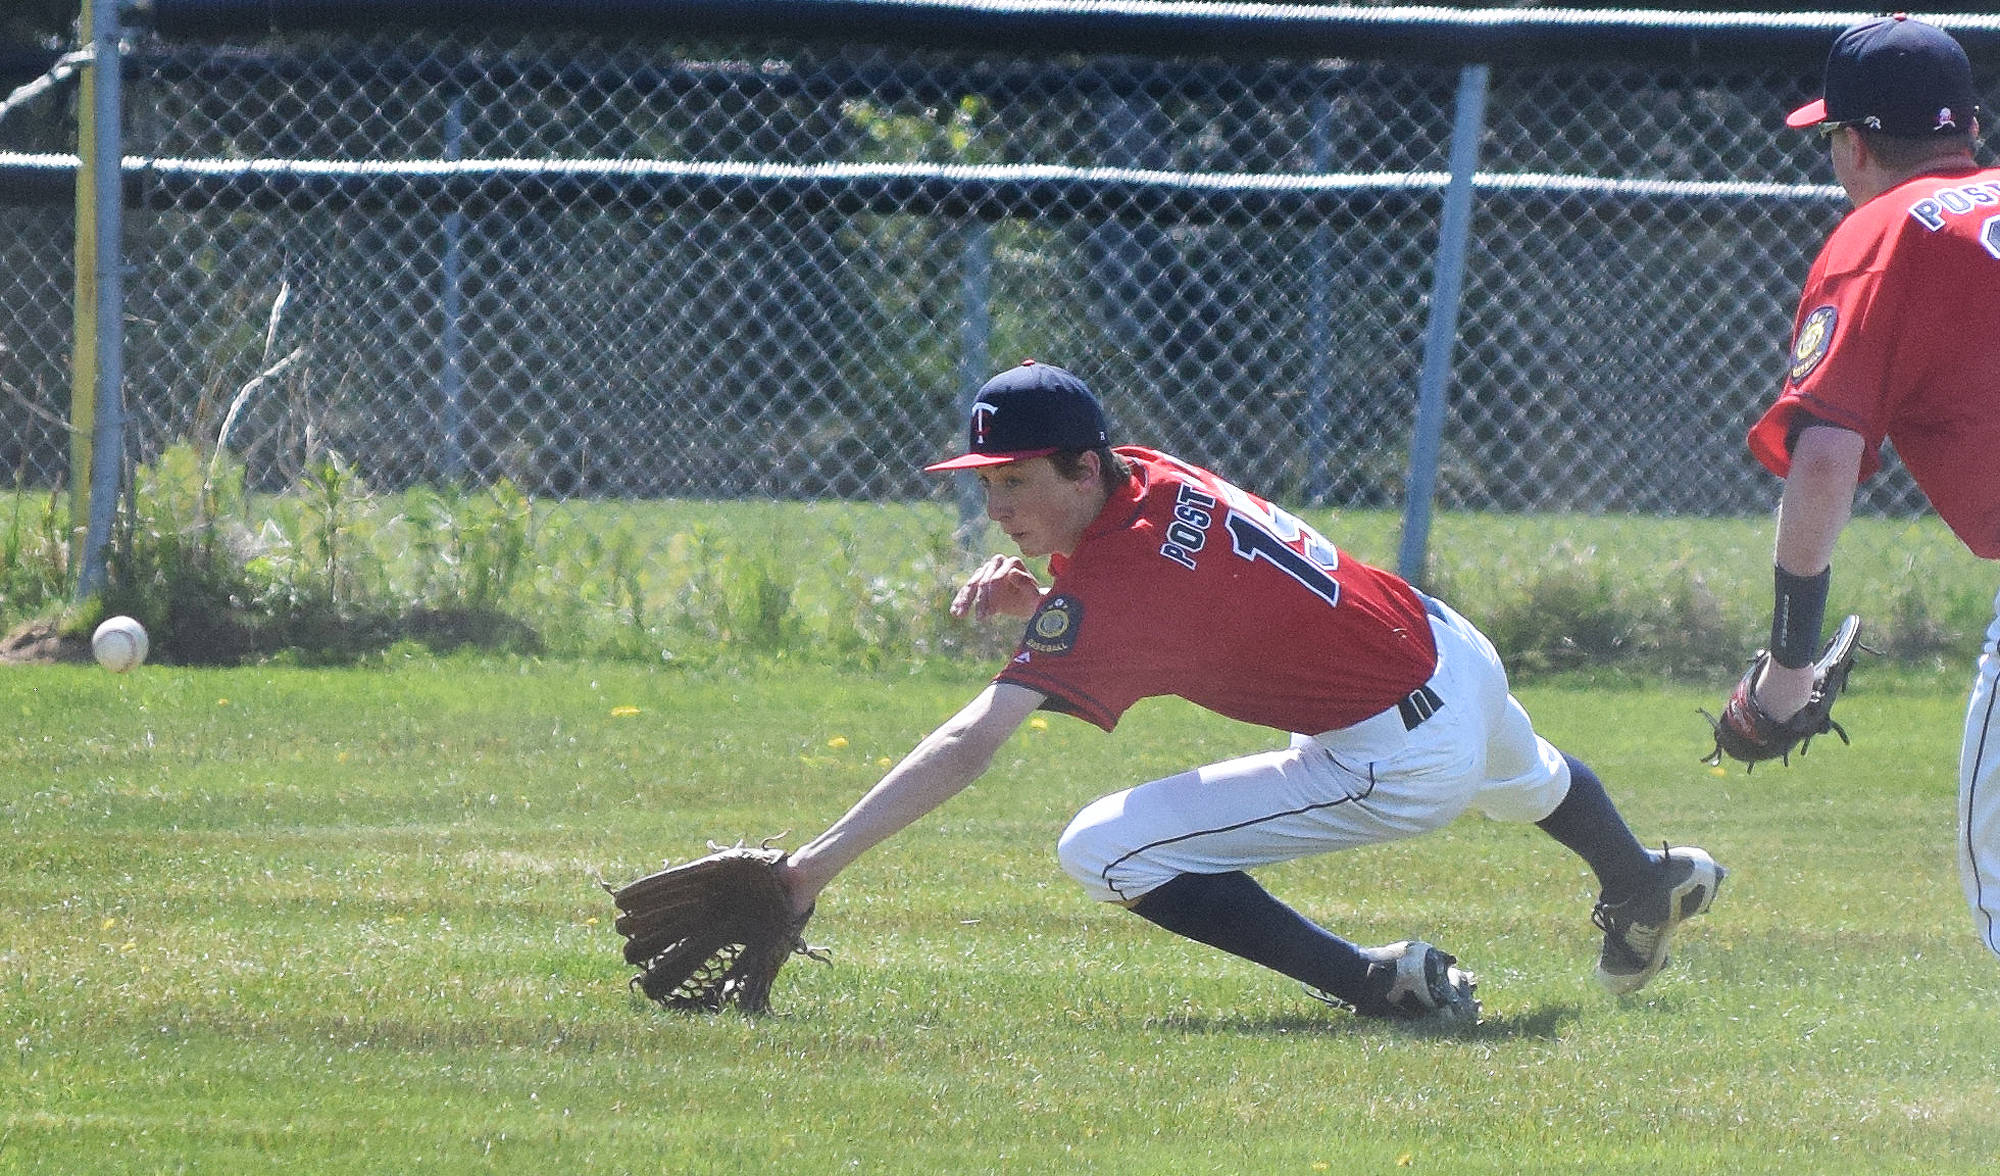 Twins left-fielder Trapper Thompson dives to cover up a line drive hit by a Bartlett batter Thursday afternoon at the Kenai Little League fields. (Photo by Joey Klecka/Peninsula Clarion)